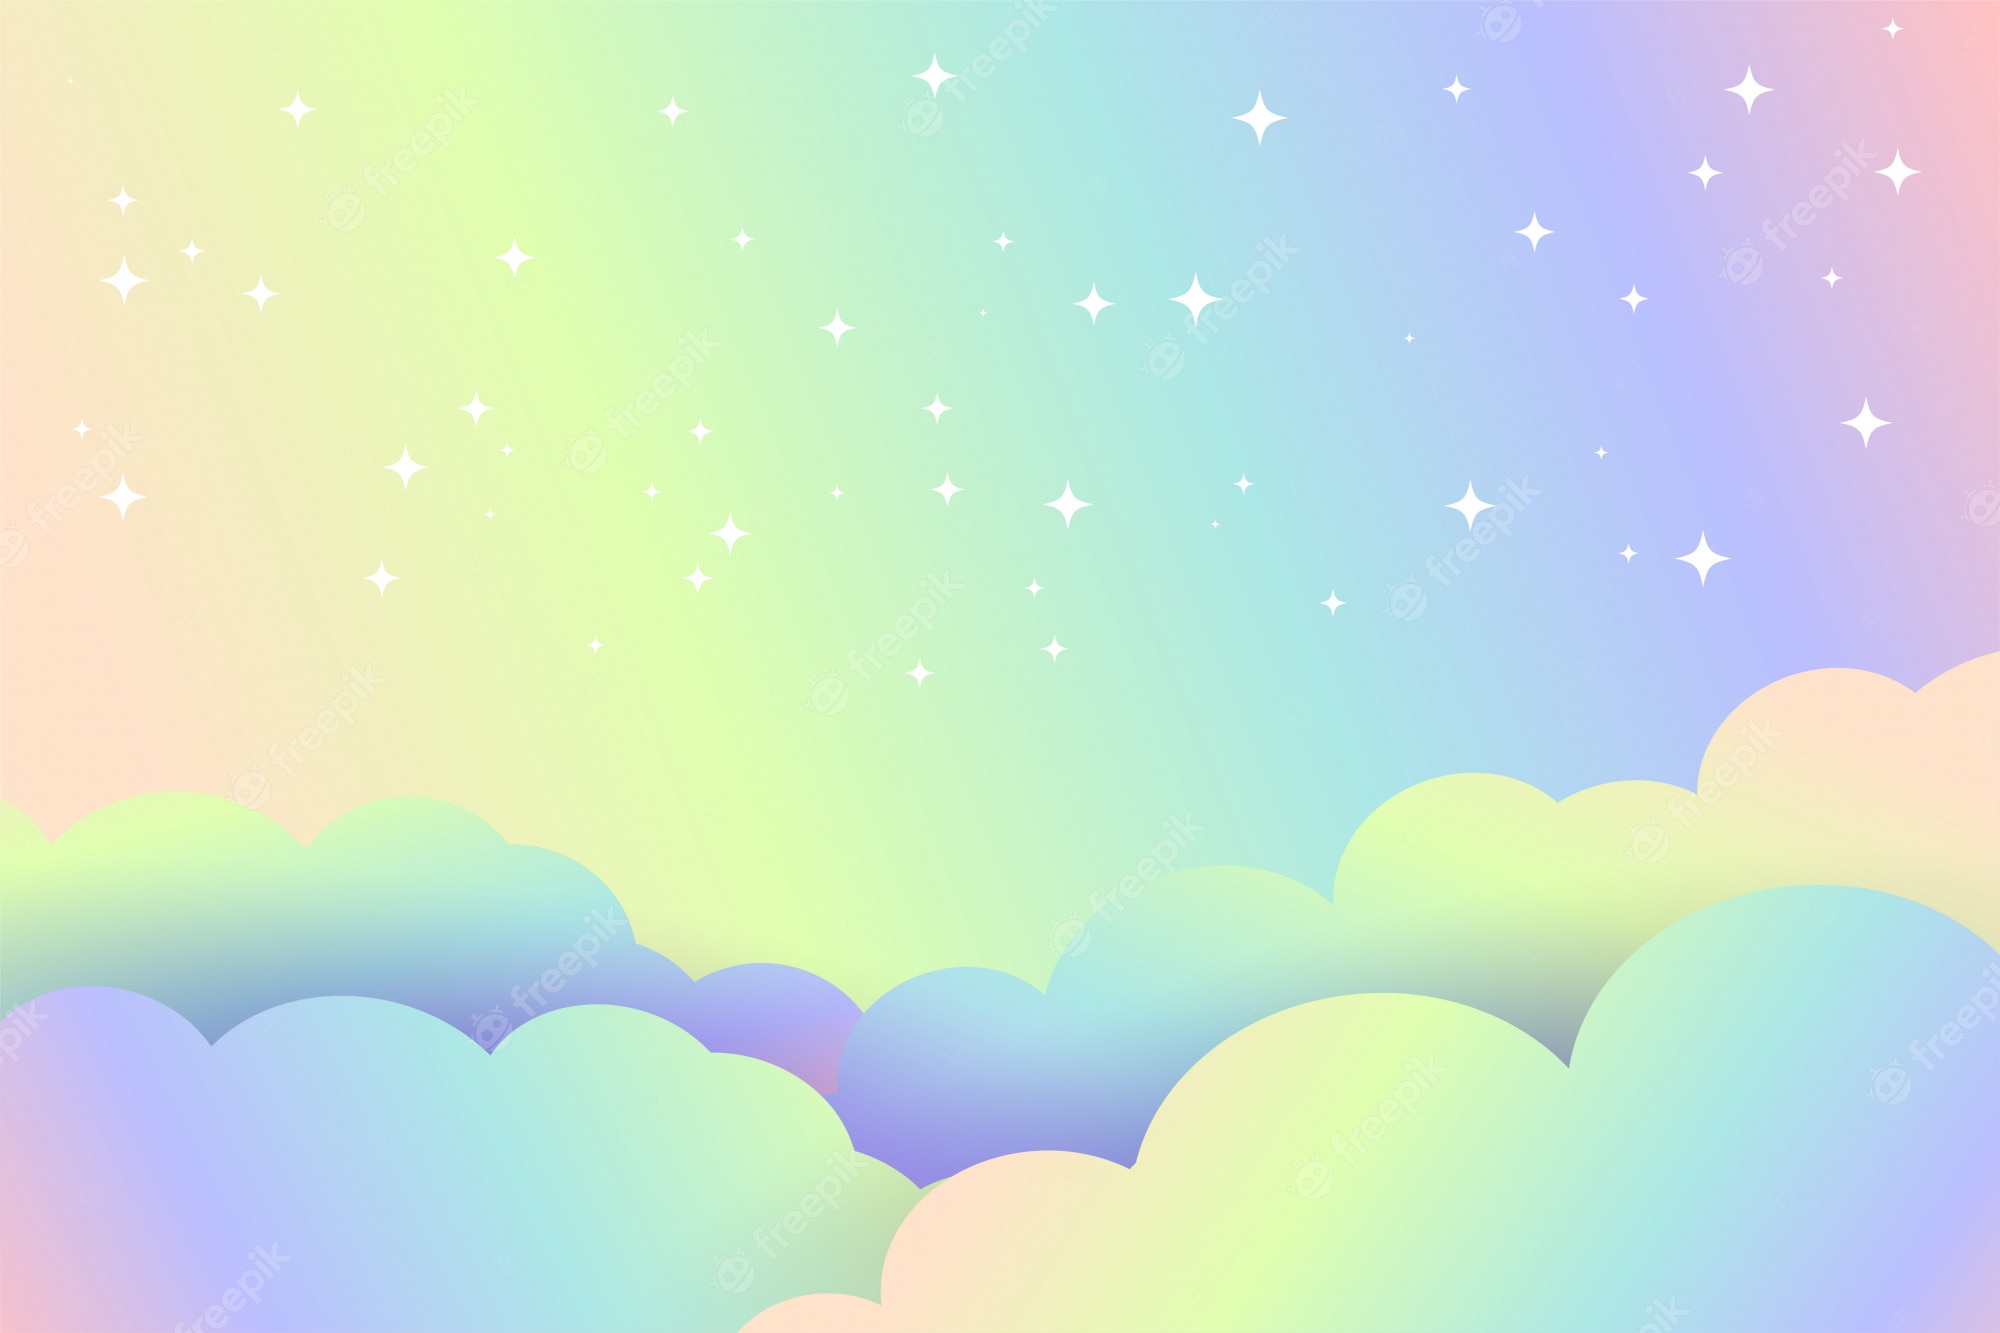 A sky with clouds and stars in the background - Pastel rainbow